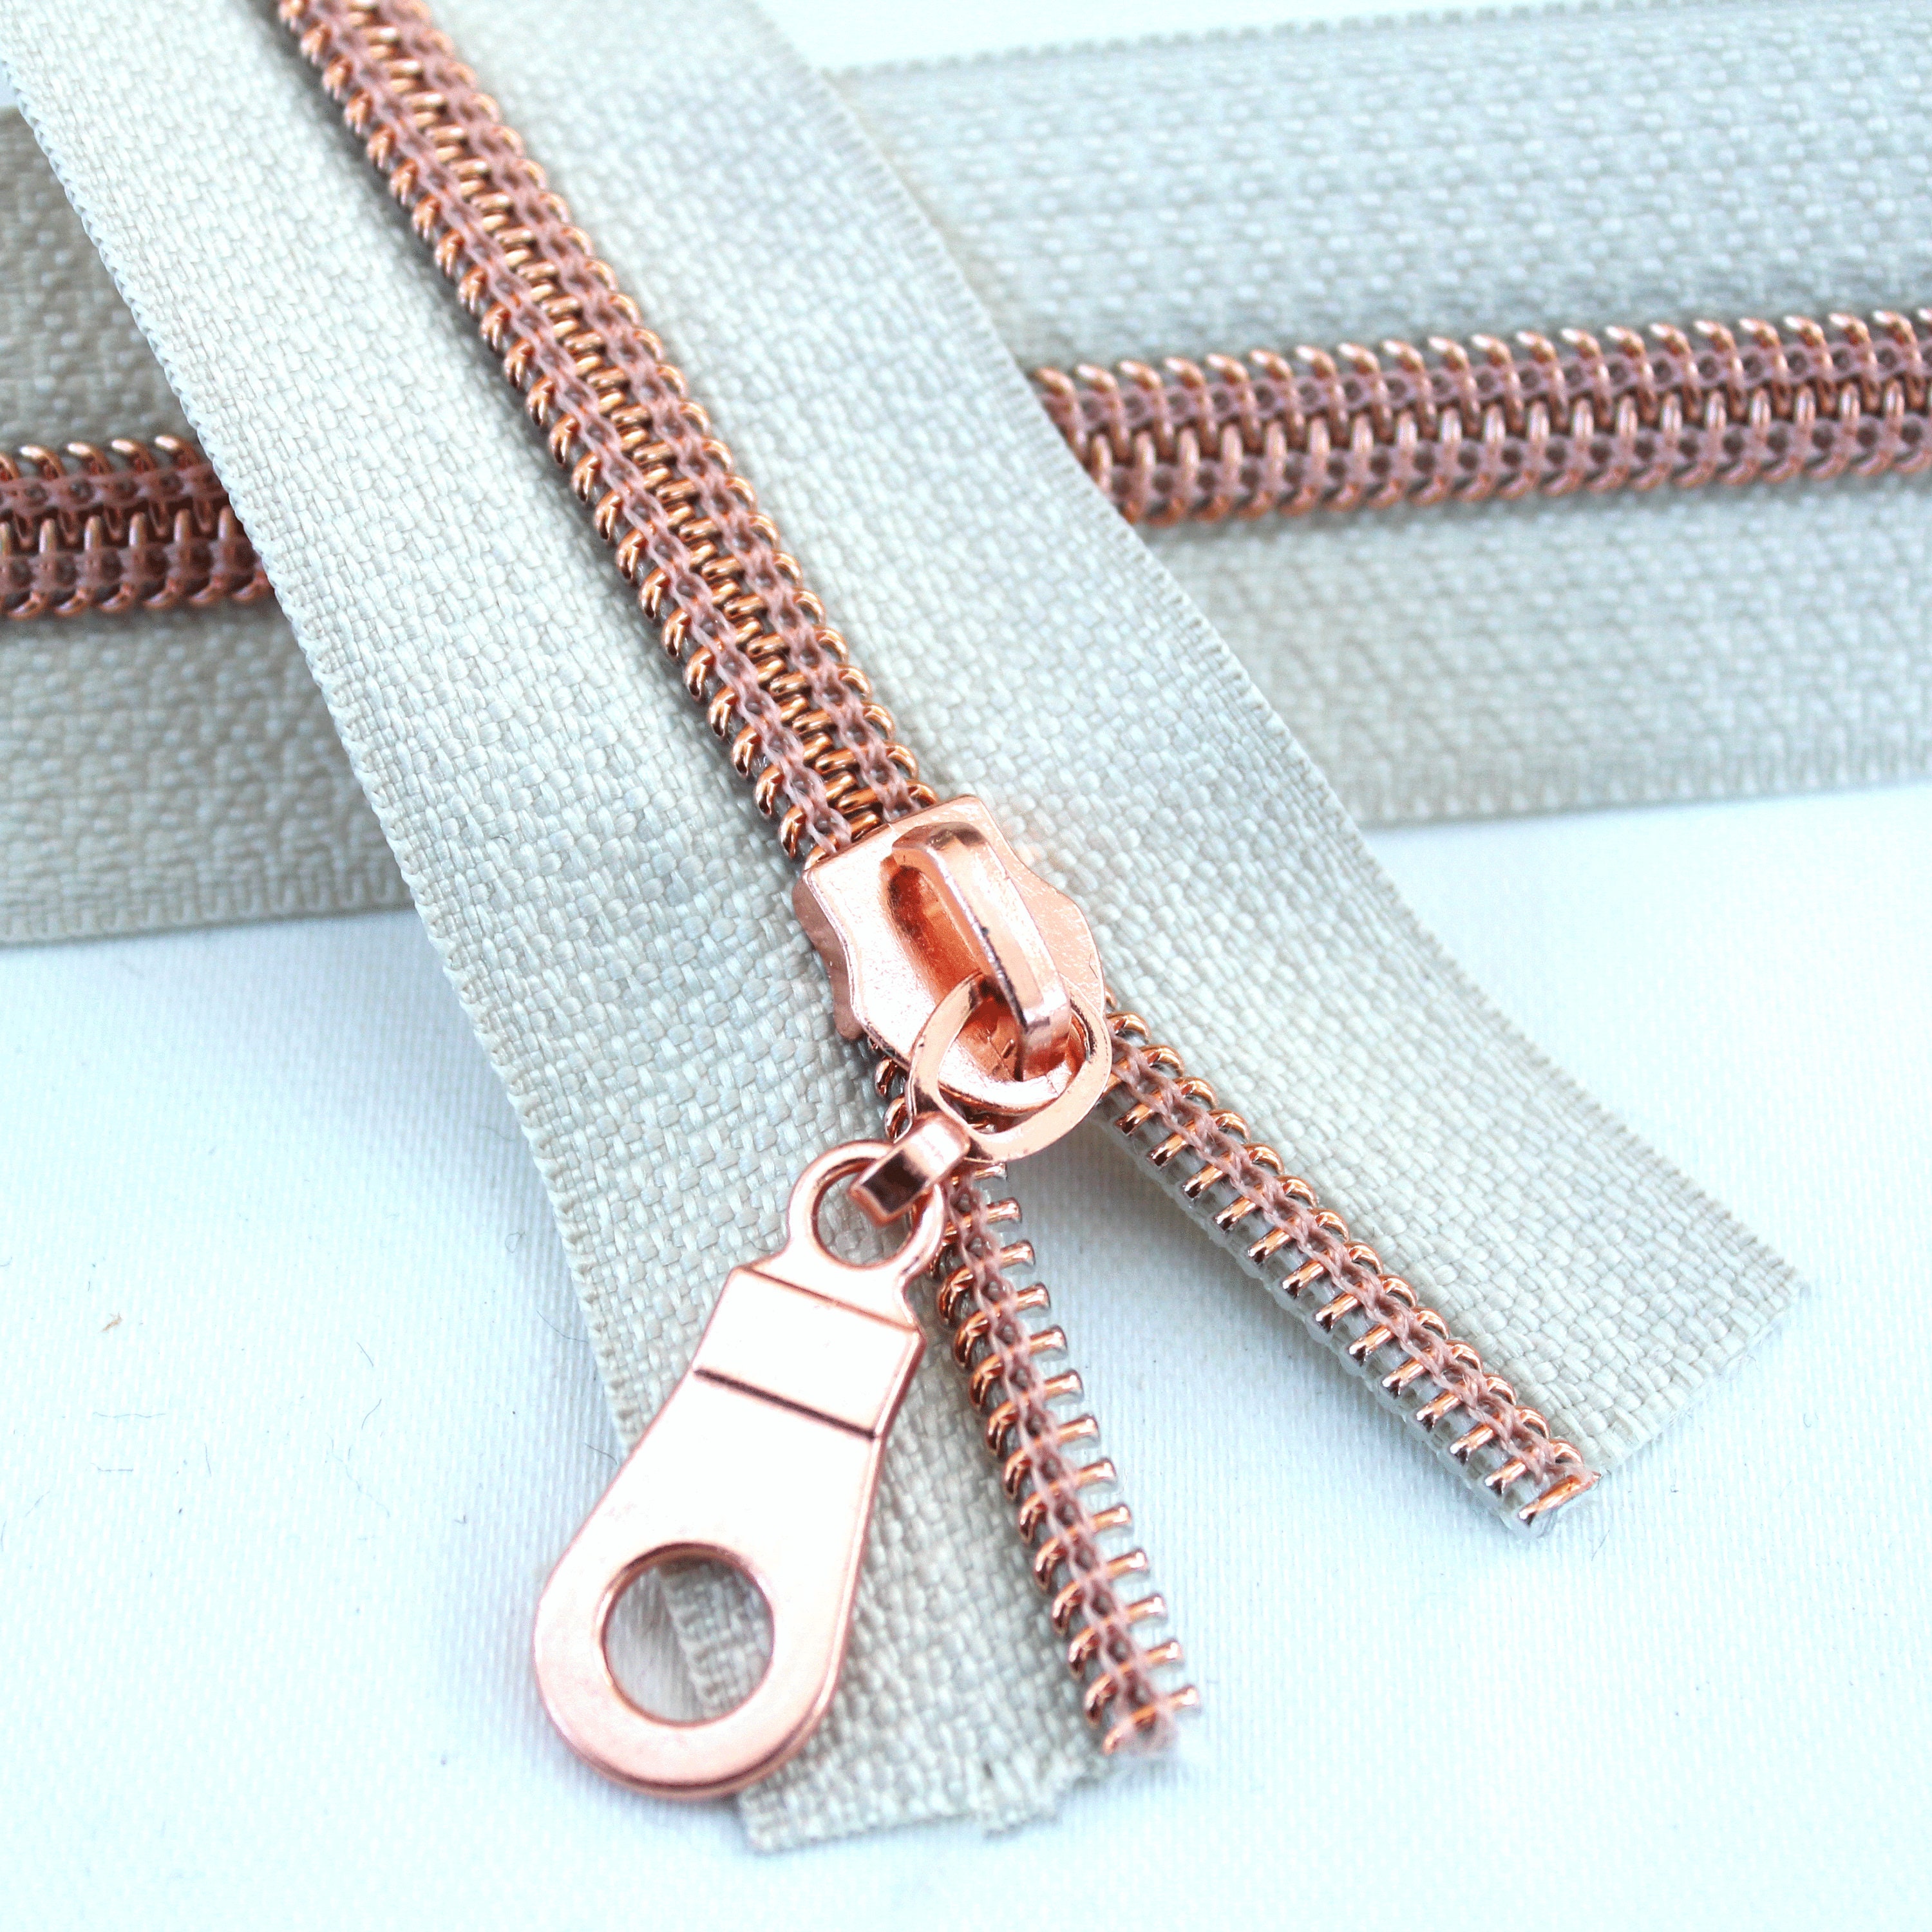 Library Furniture Zipper Pulls by Cathe Holden for Moda